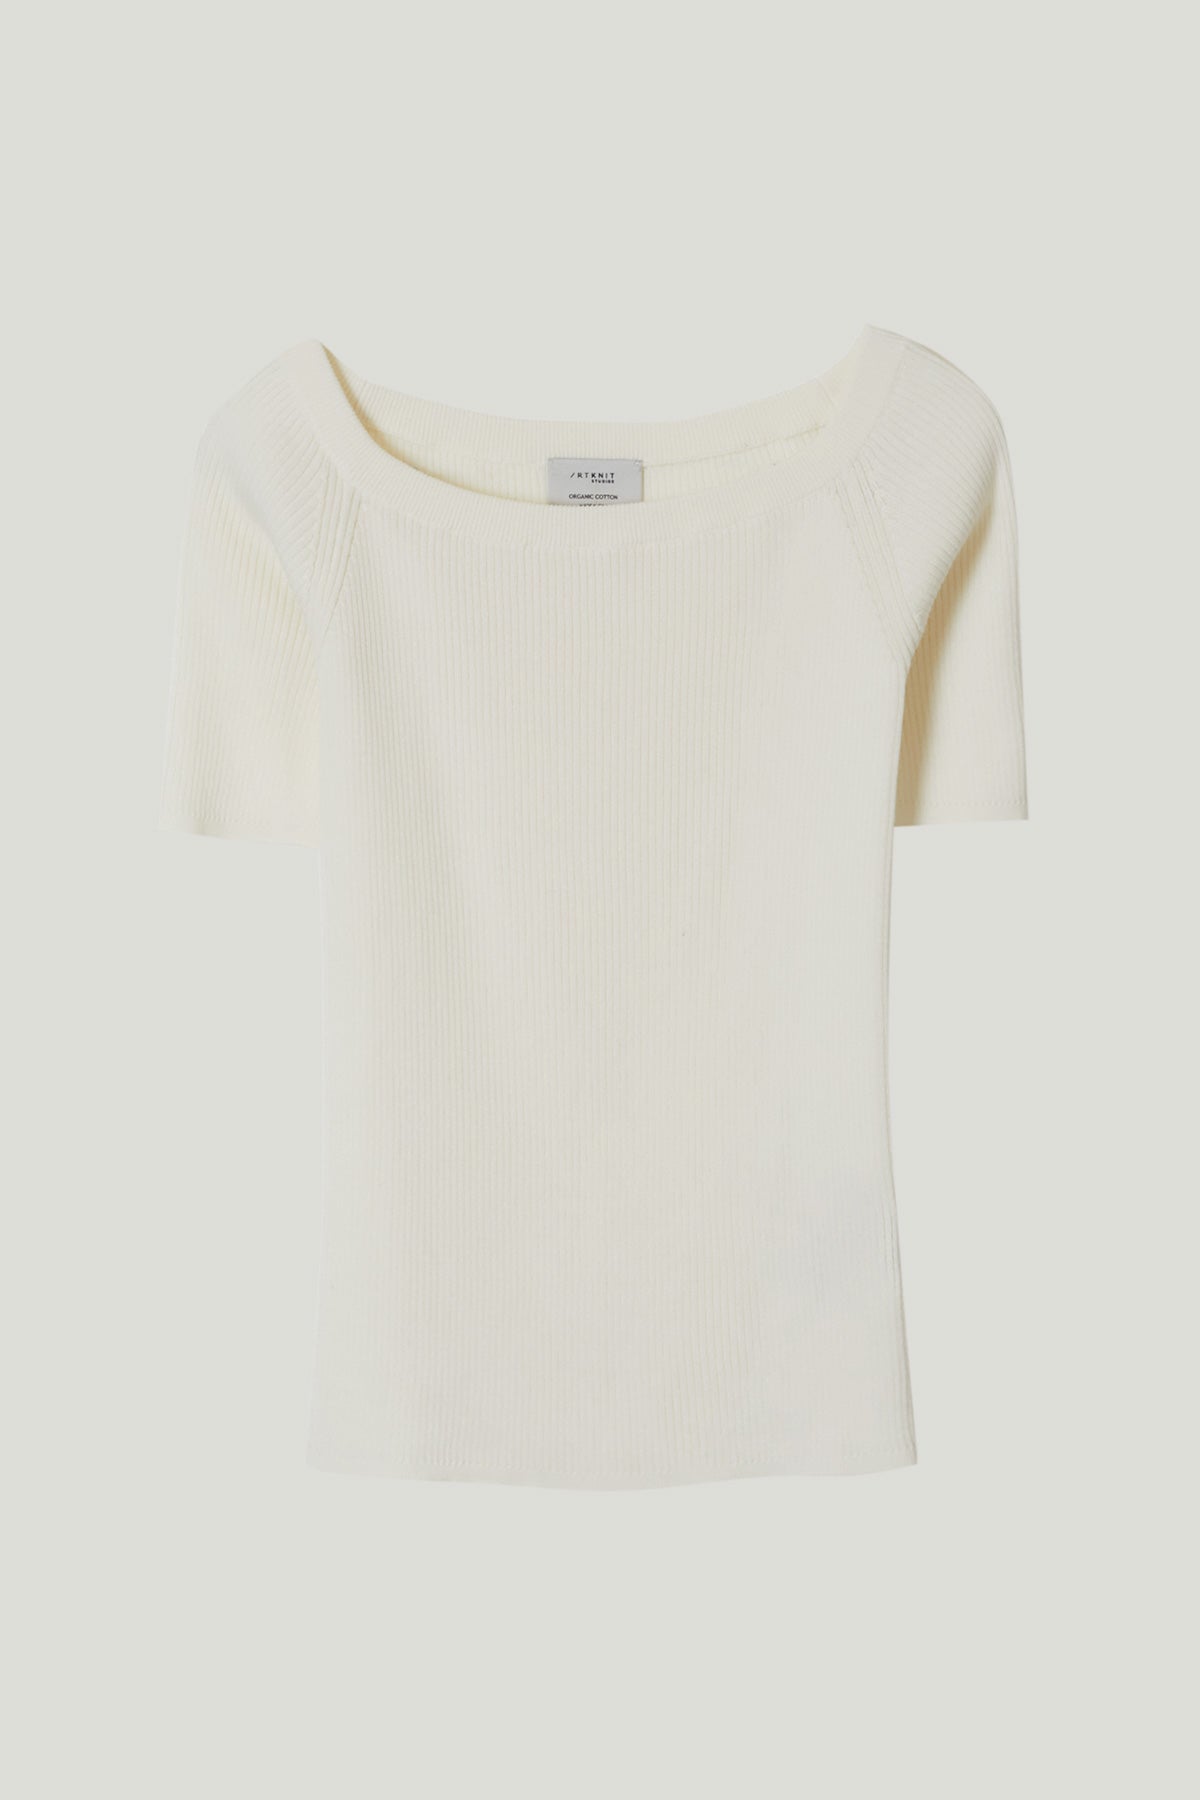 Milk White | The Organic Cotton off-the Shoulder Top